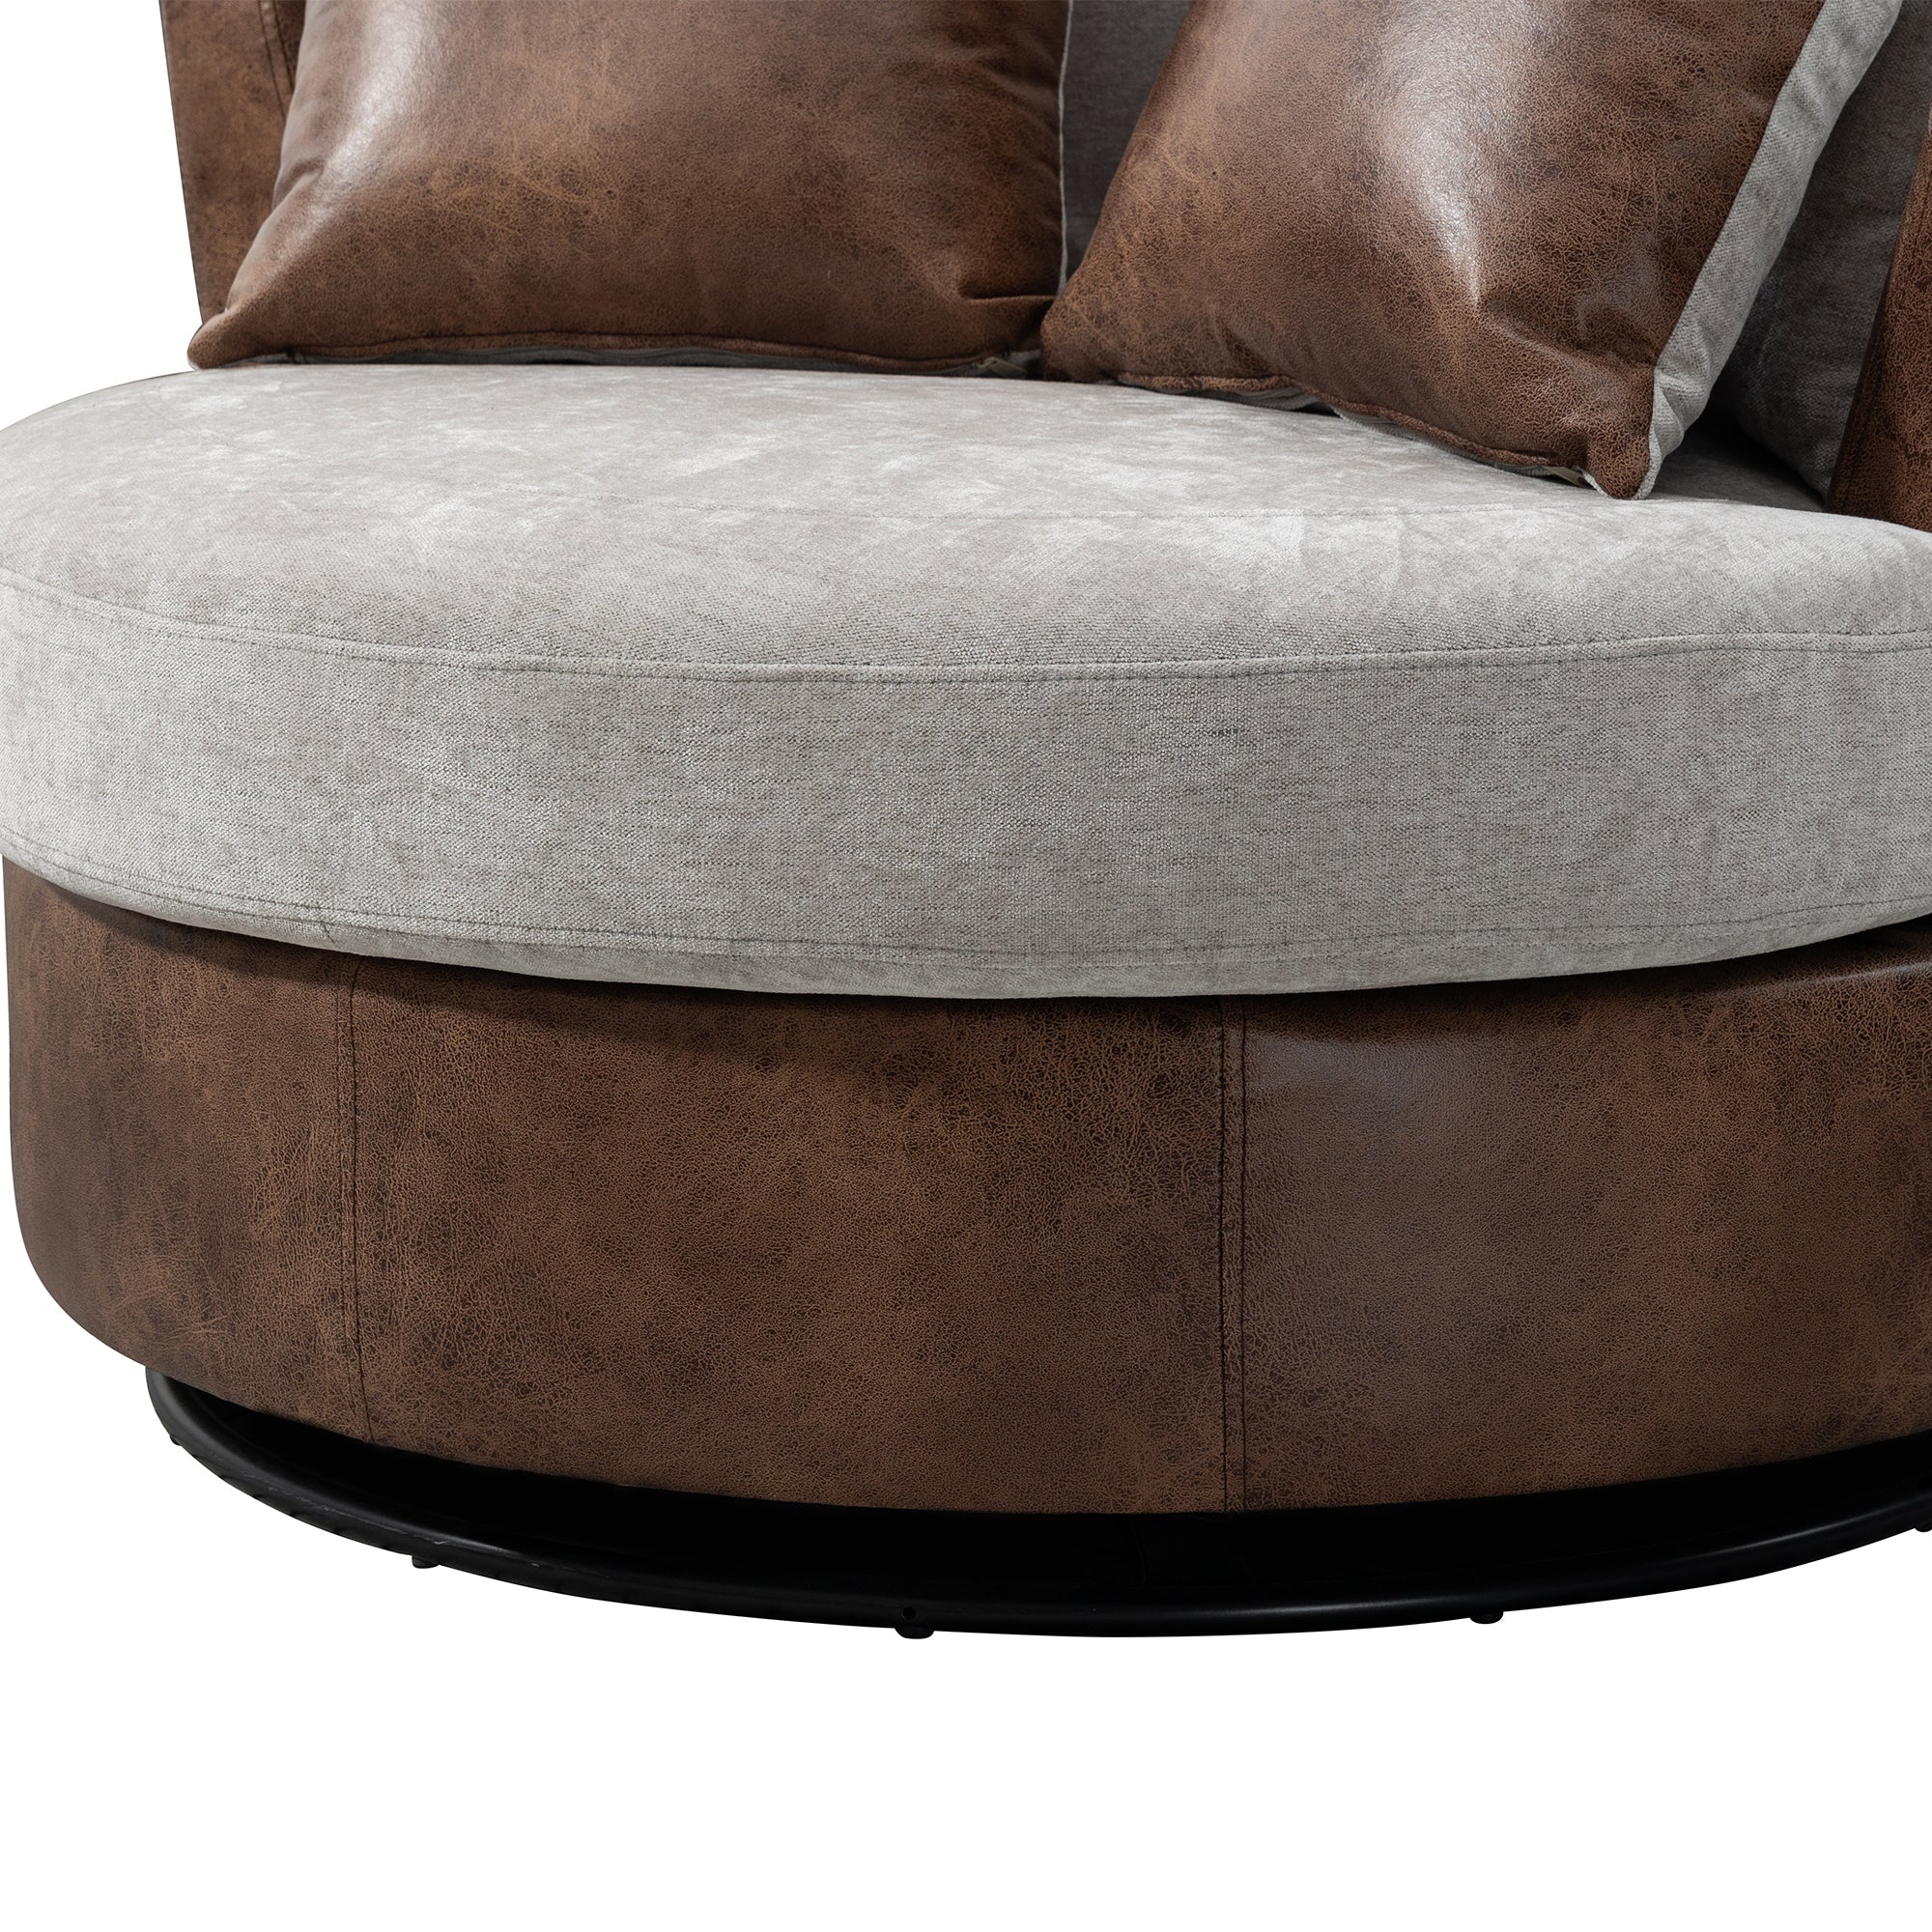 Accent Barrel Chair and Sofa With 4 Pillows 360 Degree